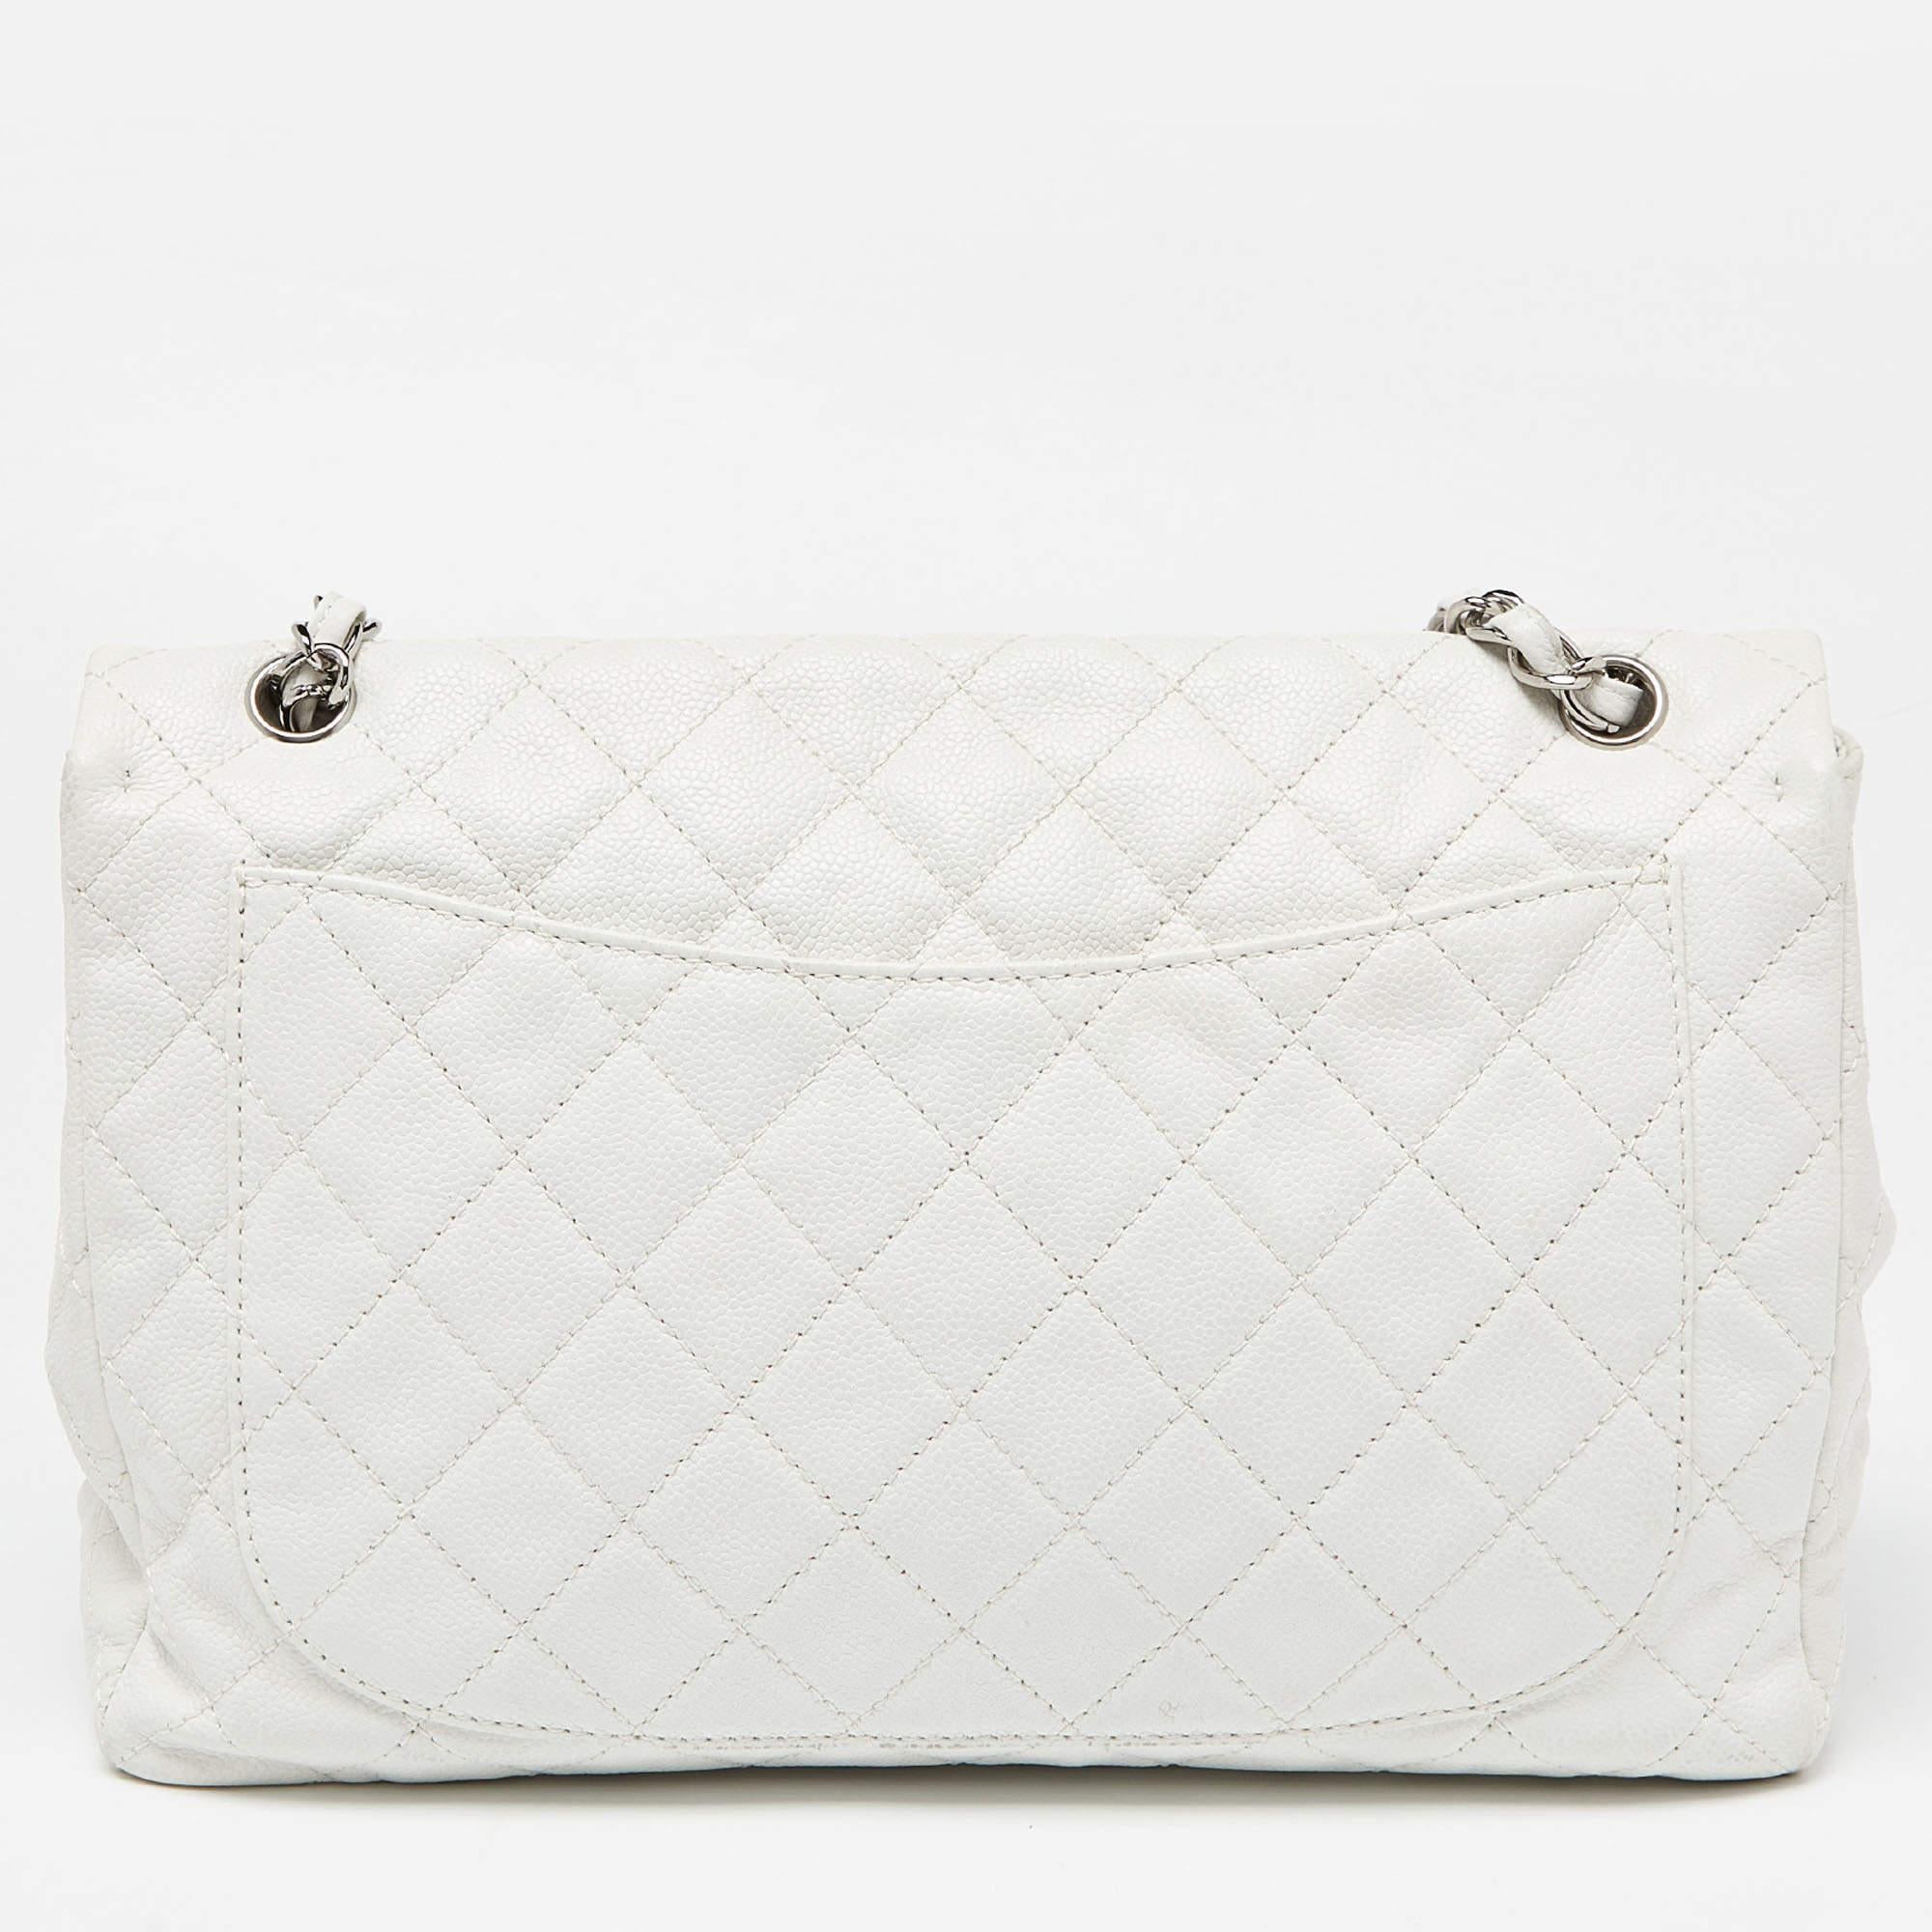 Chanel White Quilted Caviar Leather Maxi Vintage Classic Single Flap Bag For Sale 5